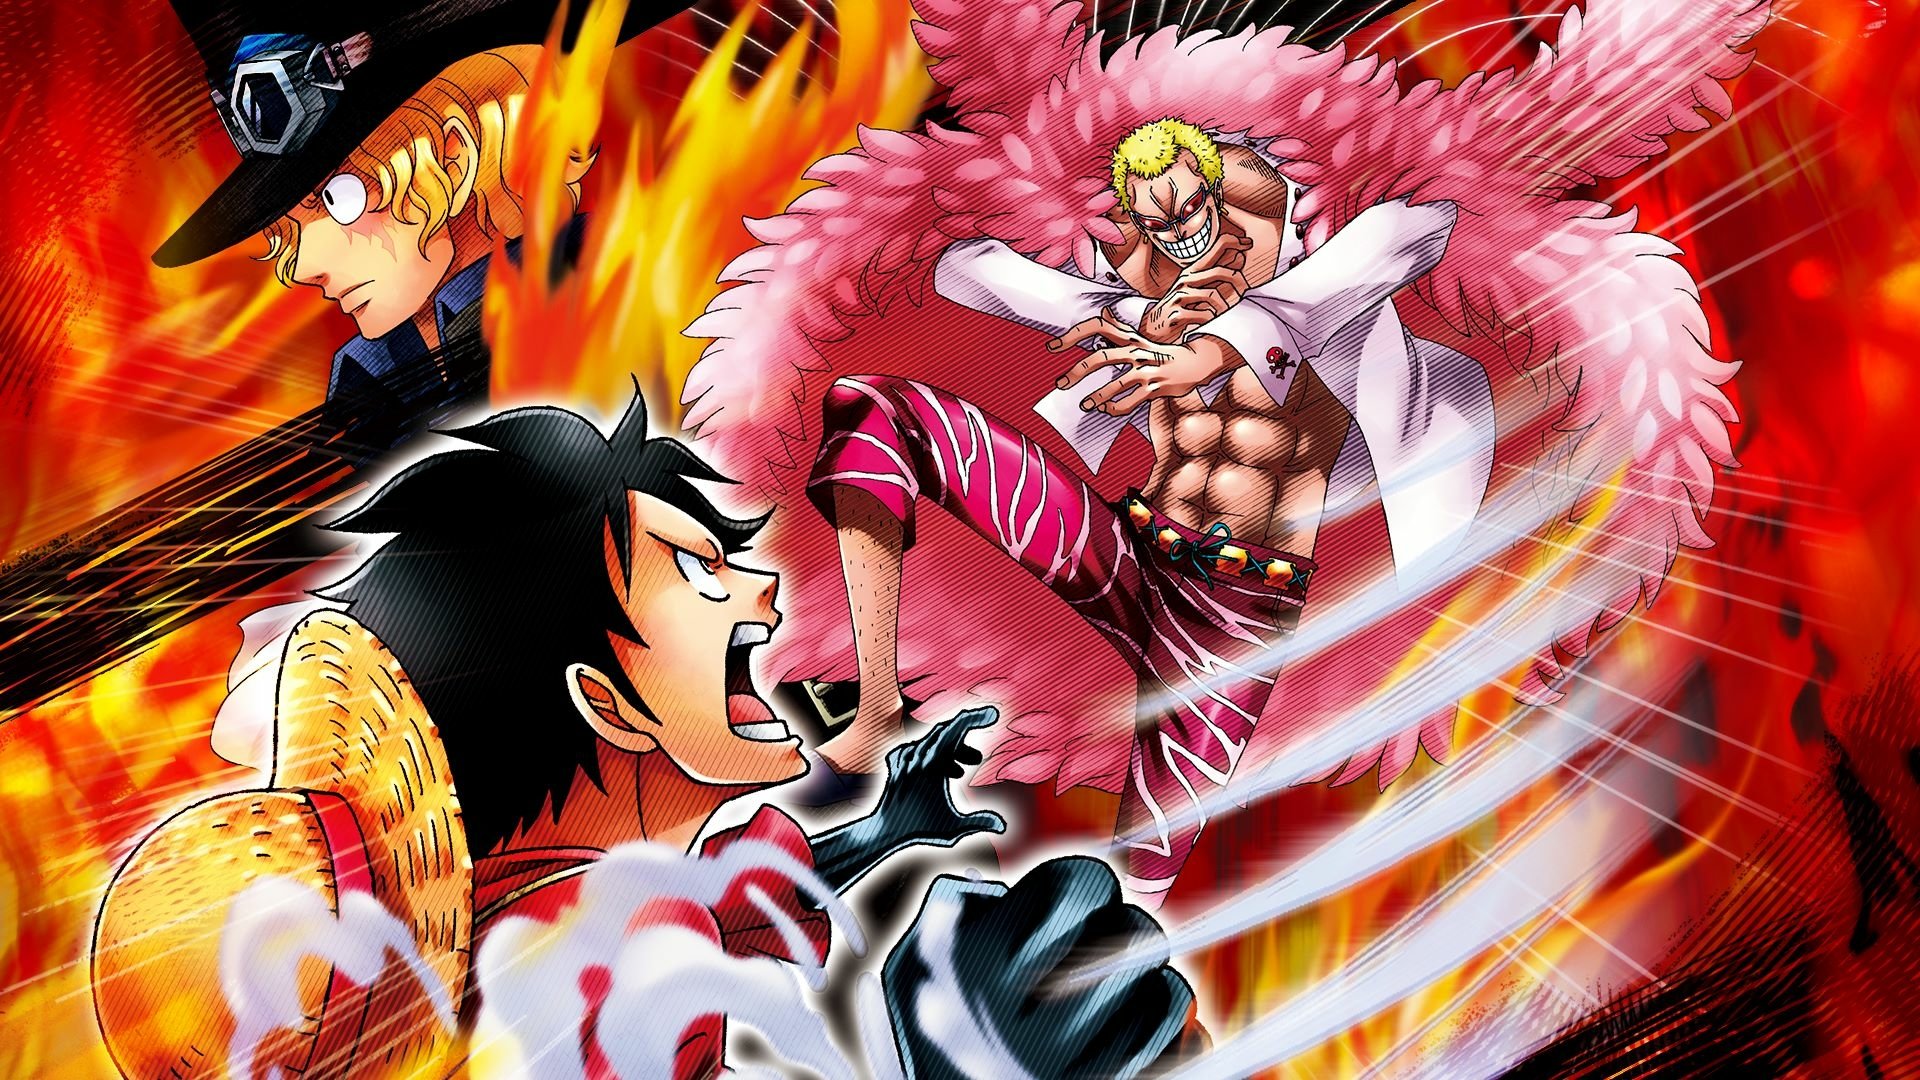 37 Donquixote Doflamingo Hd Wallpapers Background Images Wallpaper Abyss Page 2